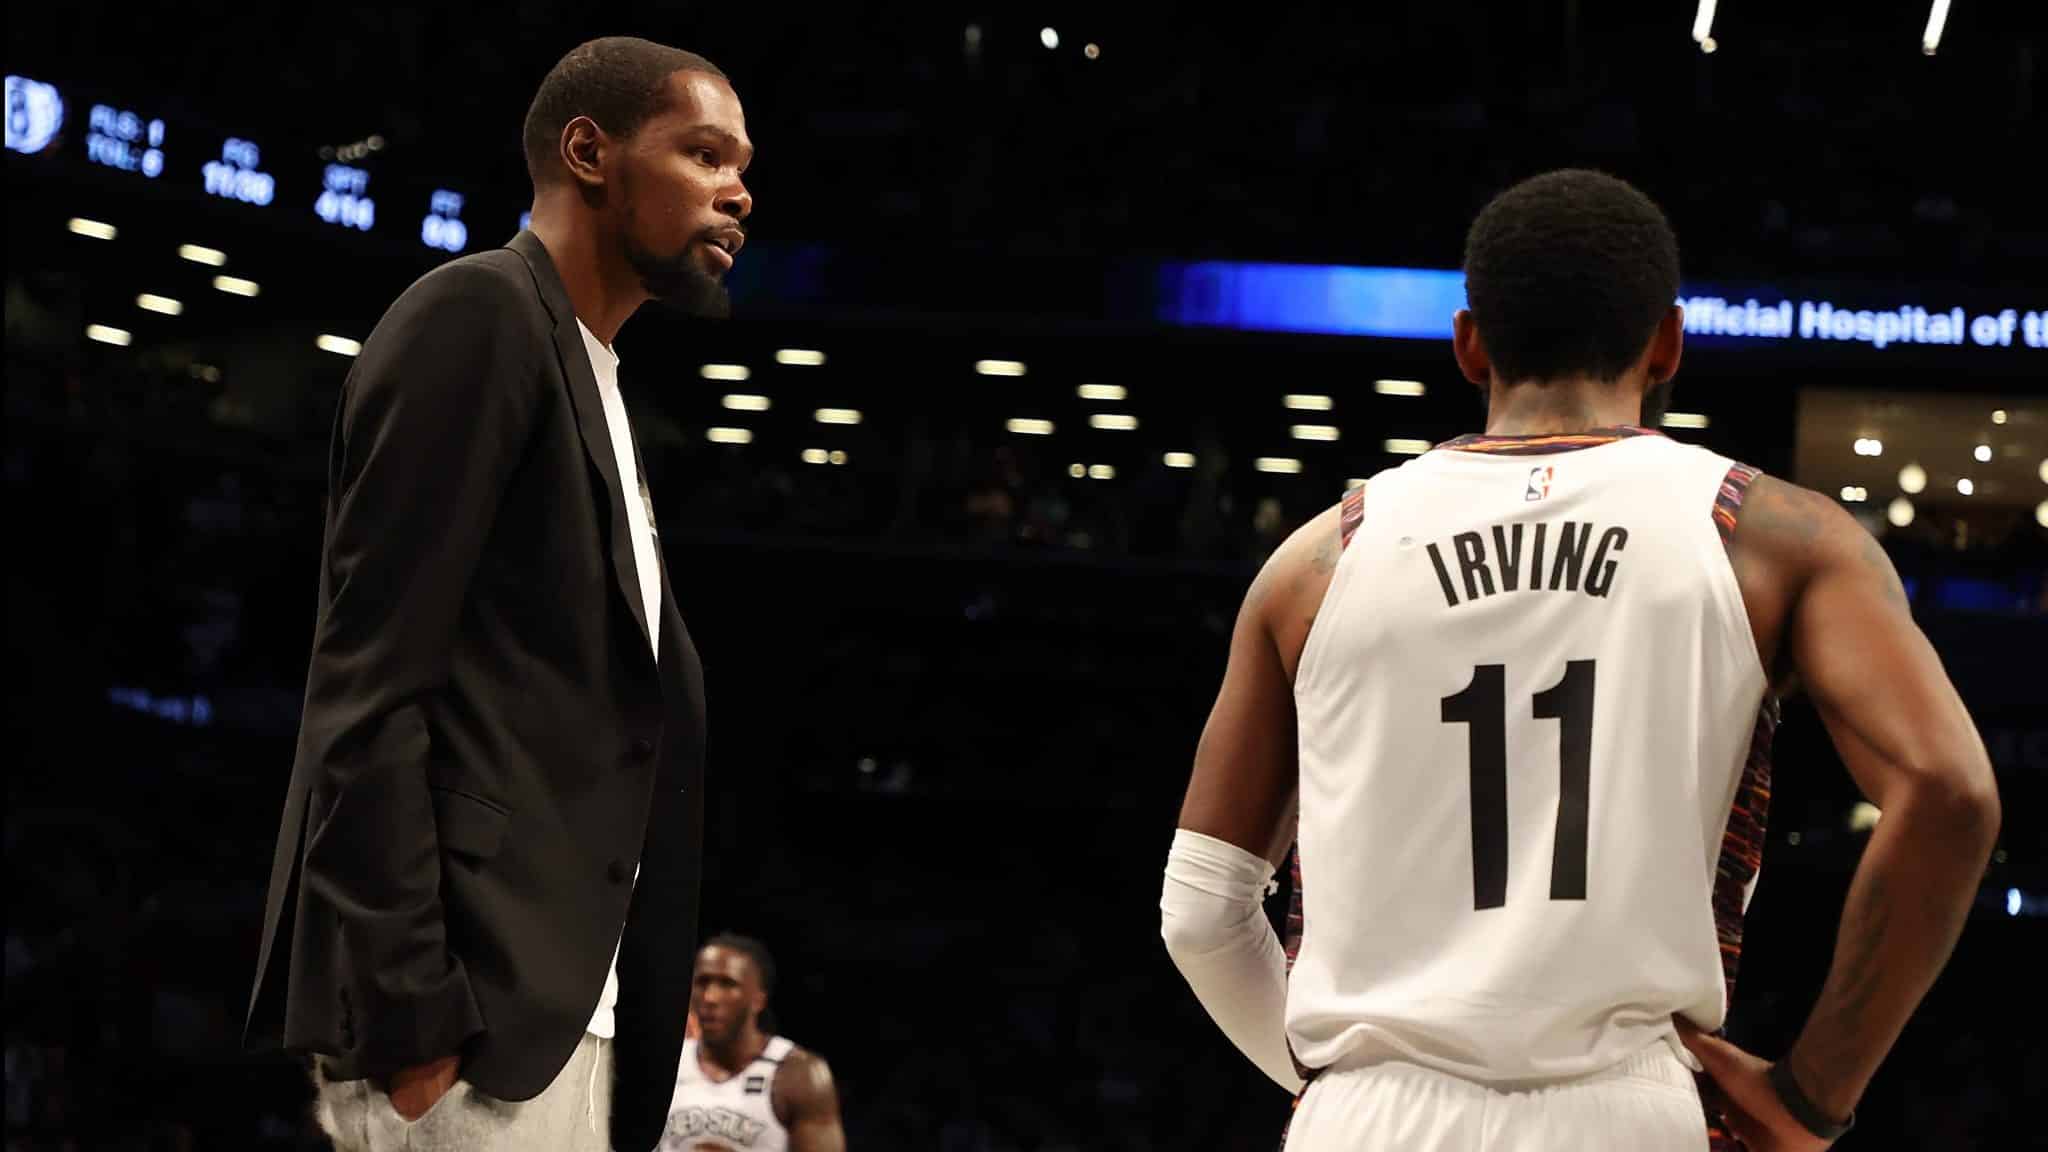 NEW YORK, NEW YORK - JANUARY 18: Kevin Durant #7 of the Brooklyn Nets talks to Kyrie Irving #11 of the Brooklyn Nets during their game against the Milwaukee Bucksat Barclays Center on January 18, 2020 in New York City. NOTE TO USER: User expressly acknowledges and agrees that, by downloading and/or using this photograph, user is consenting to the terms and conditions of the Getty Images License Agreement.